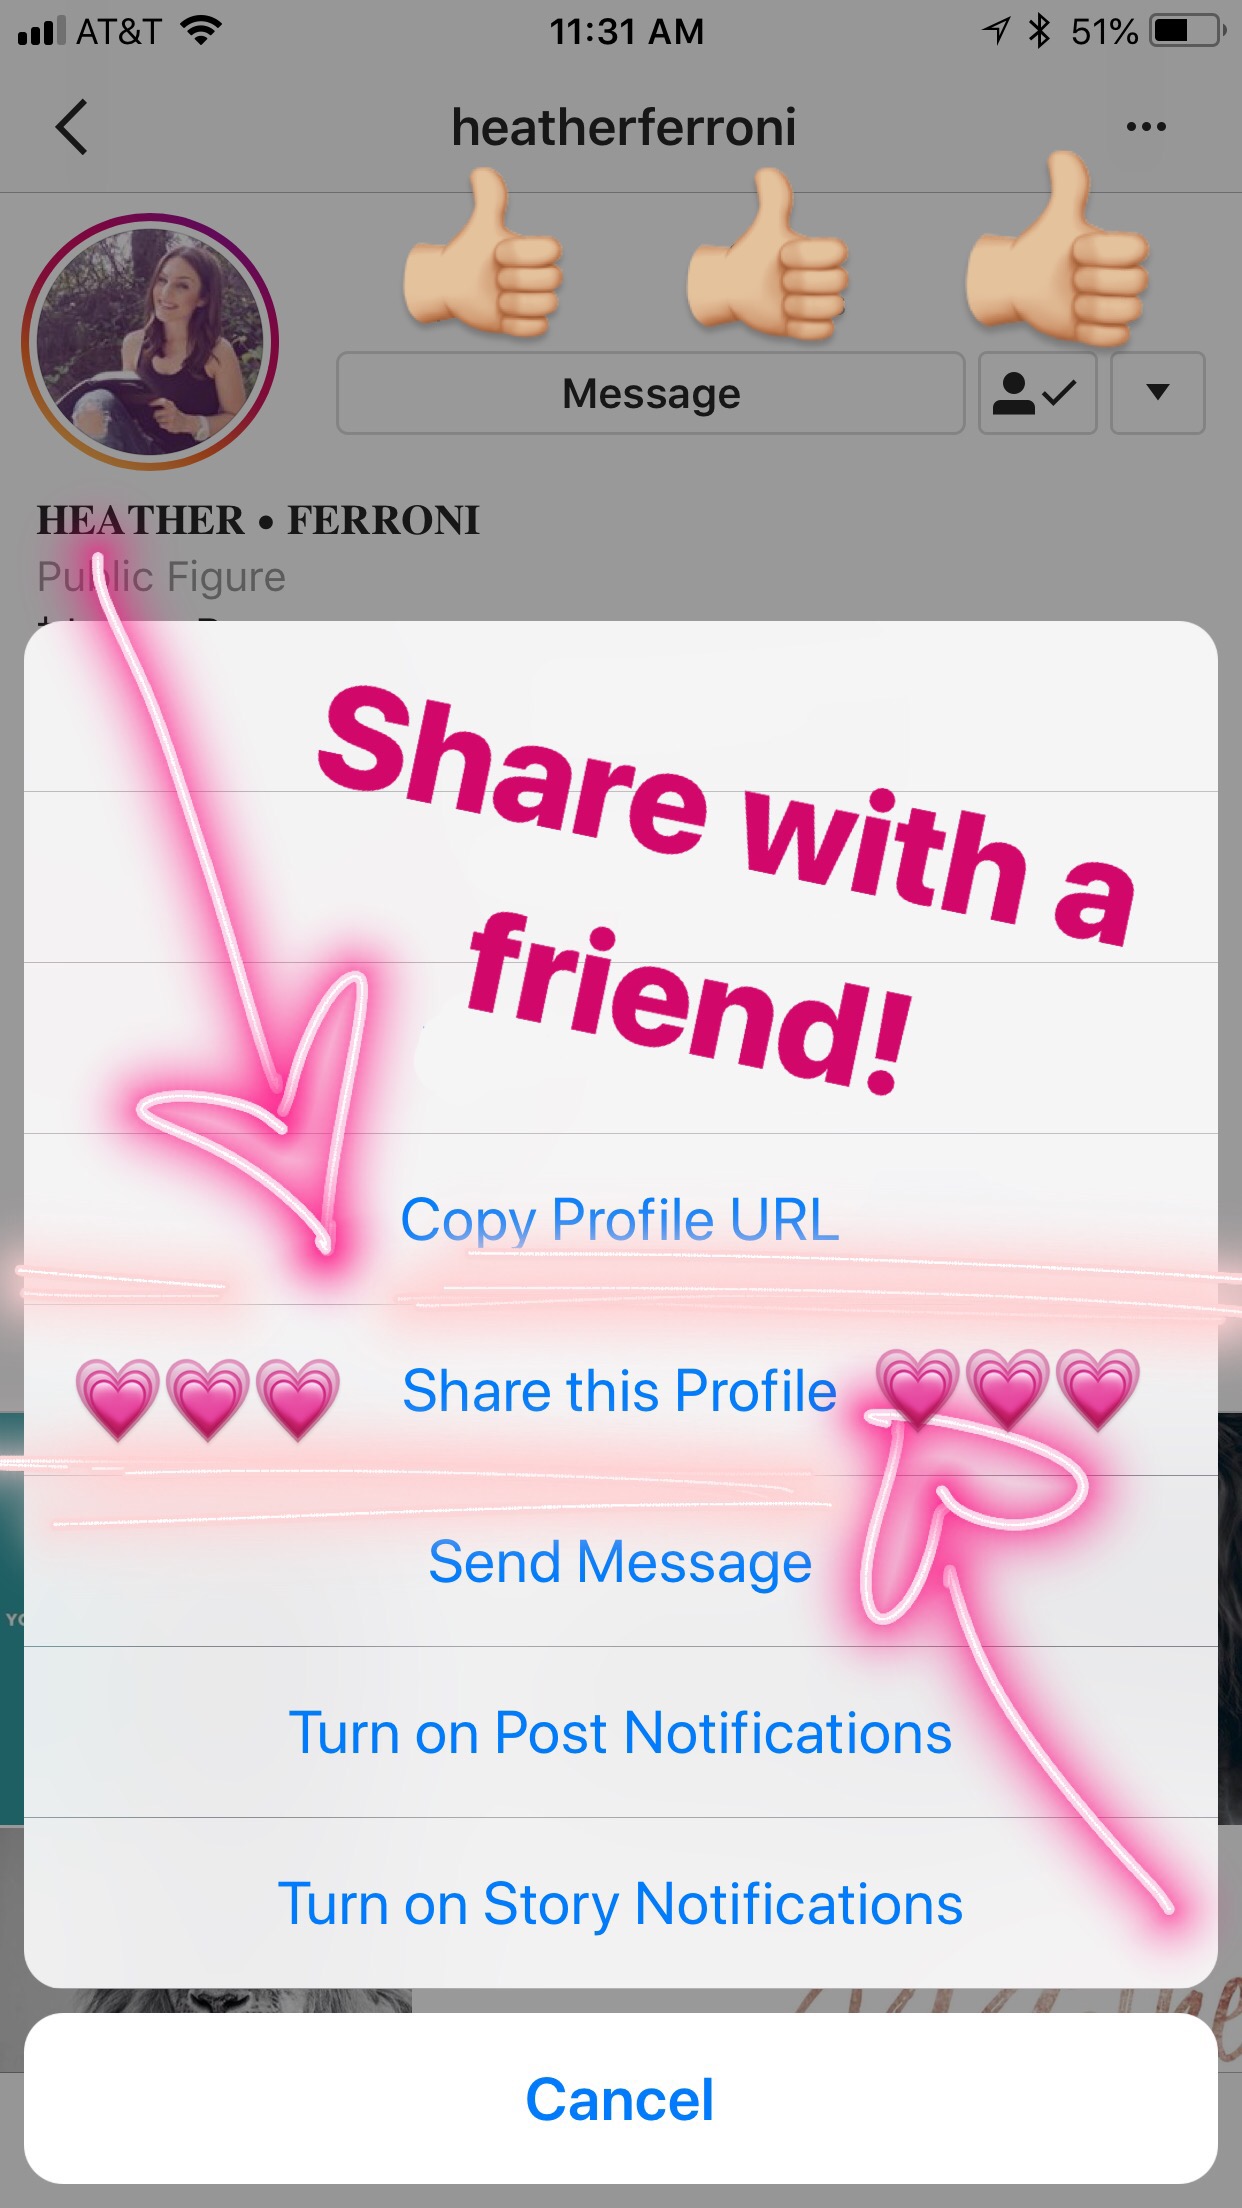 How to Share Instagram Profile with a Friend